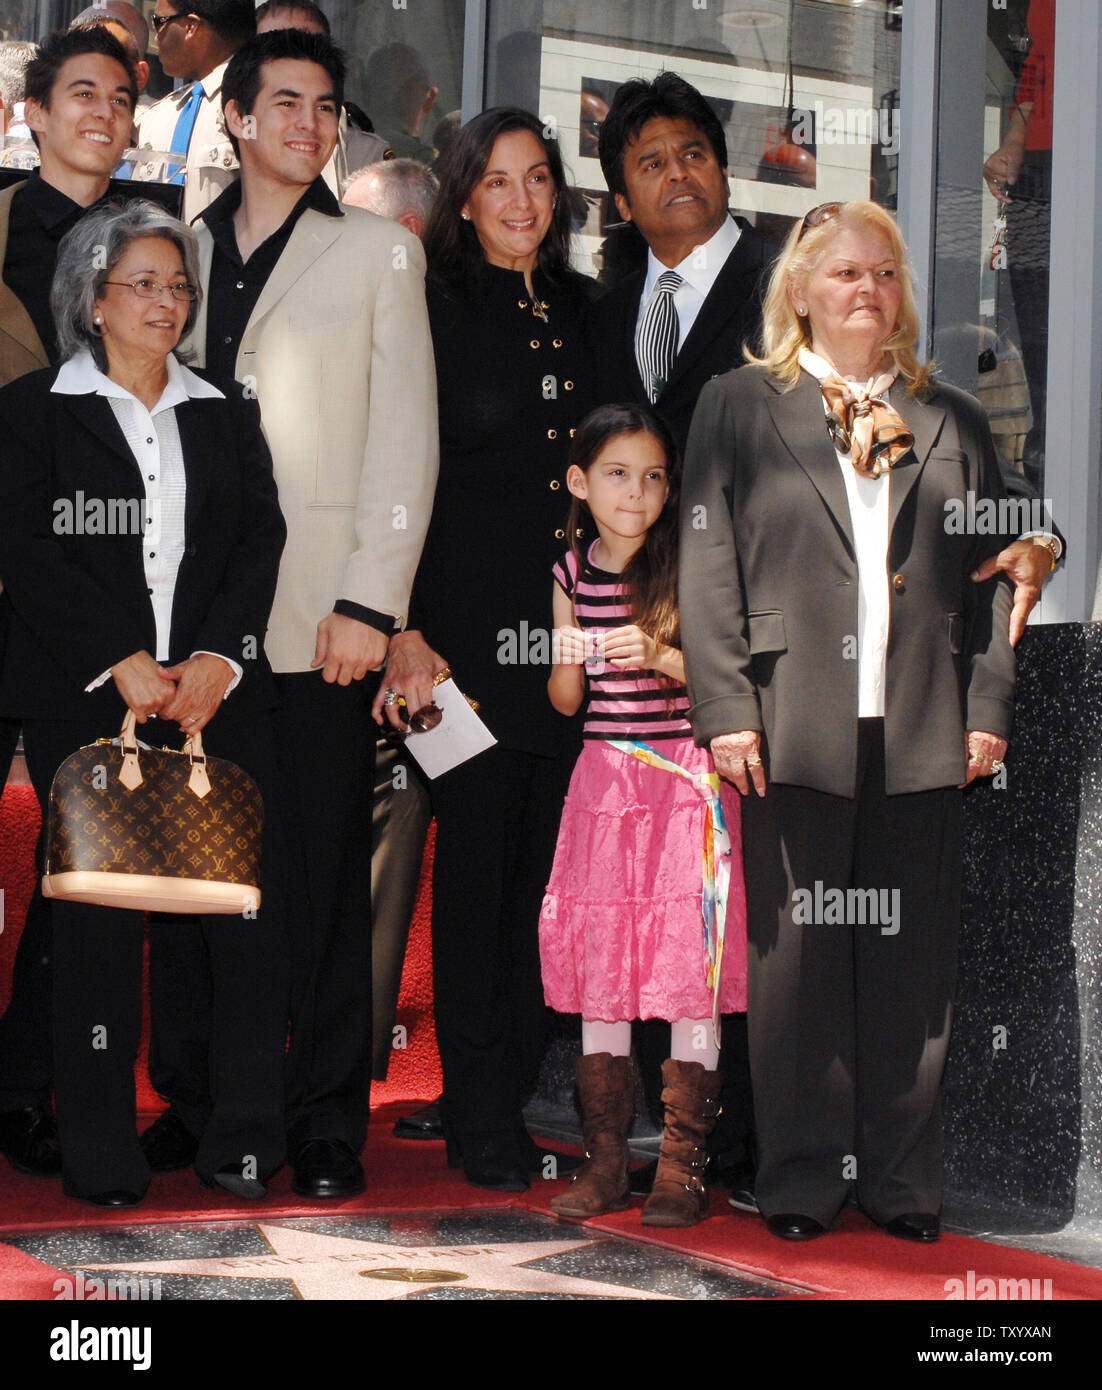 Actor Erik Estrada, right rear, best known for his role as Officer Frank 'Ponch' Poncherello in the 1977-1983 television series 'CHiPS' poses with young daughter Francesca, his mother Carmen and wife Nanette (R) along with other unidentified family members after his star was unveiled on the Hollywood Walk of Fame in Los Angeles on April 19, 2007. (UPI Photo/Jim Ruymen) Stock Photo